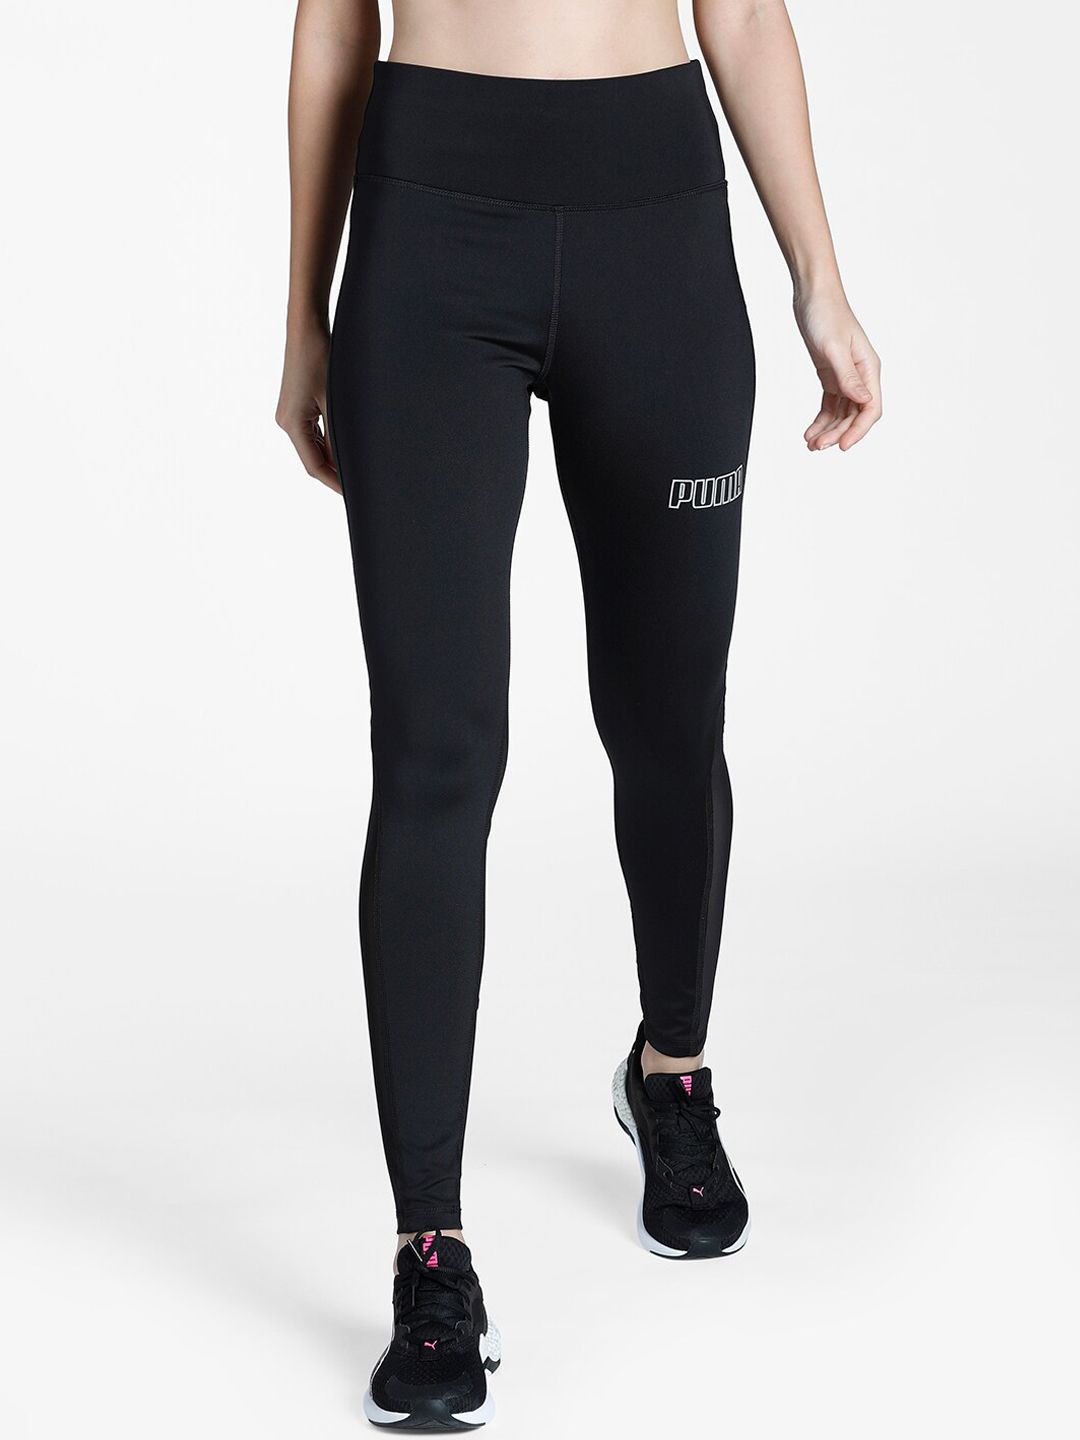 Puma Women Black Active High Waisted Tights Price in India